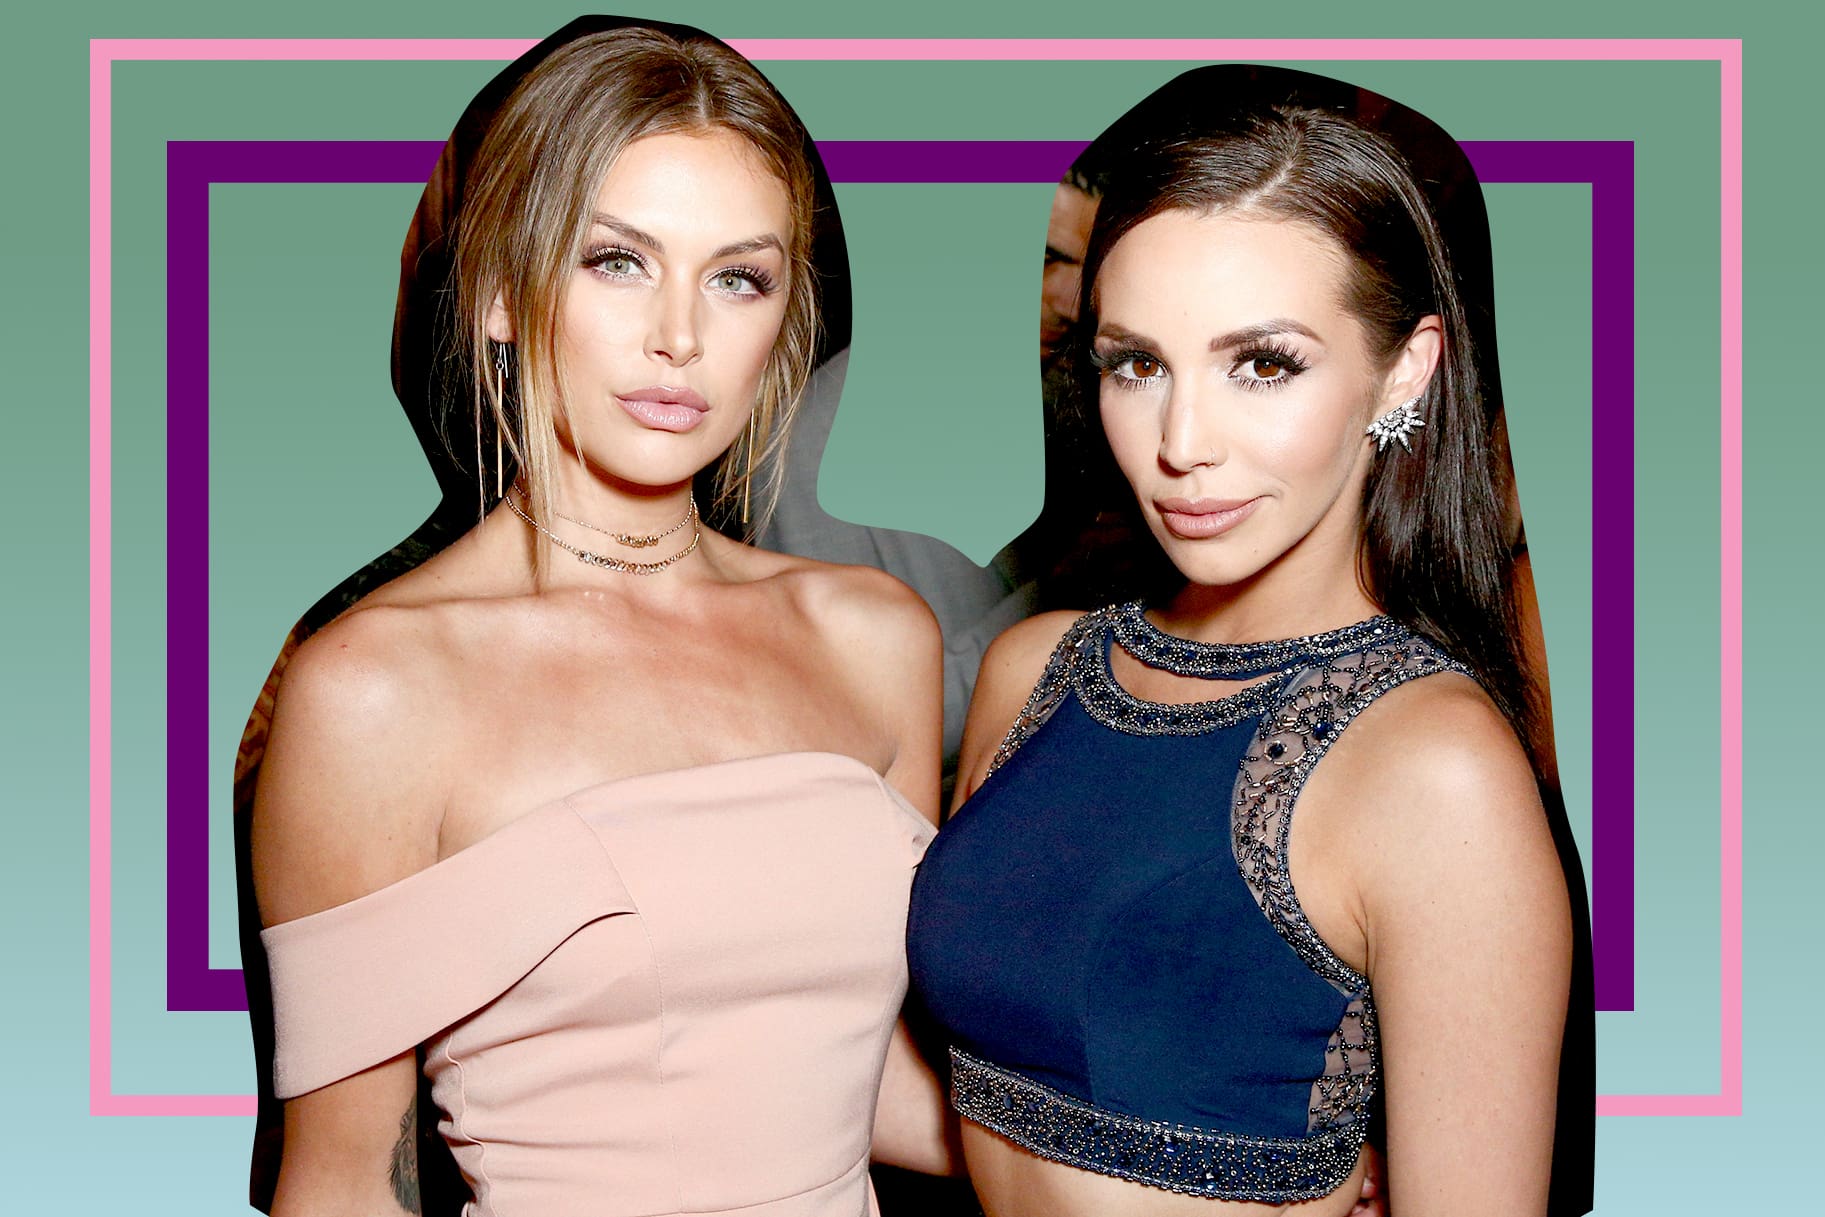 ”vanderpump-rules-scheana-marie-thinks-lala-kent-let-fame-get-to-her-head”